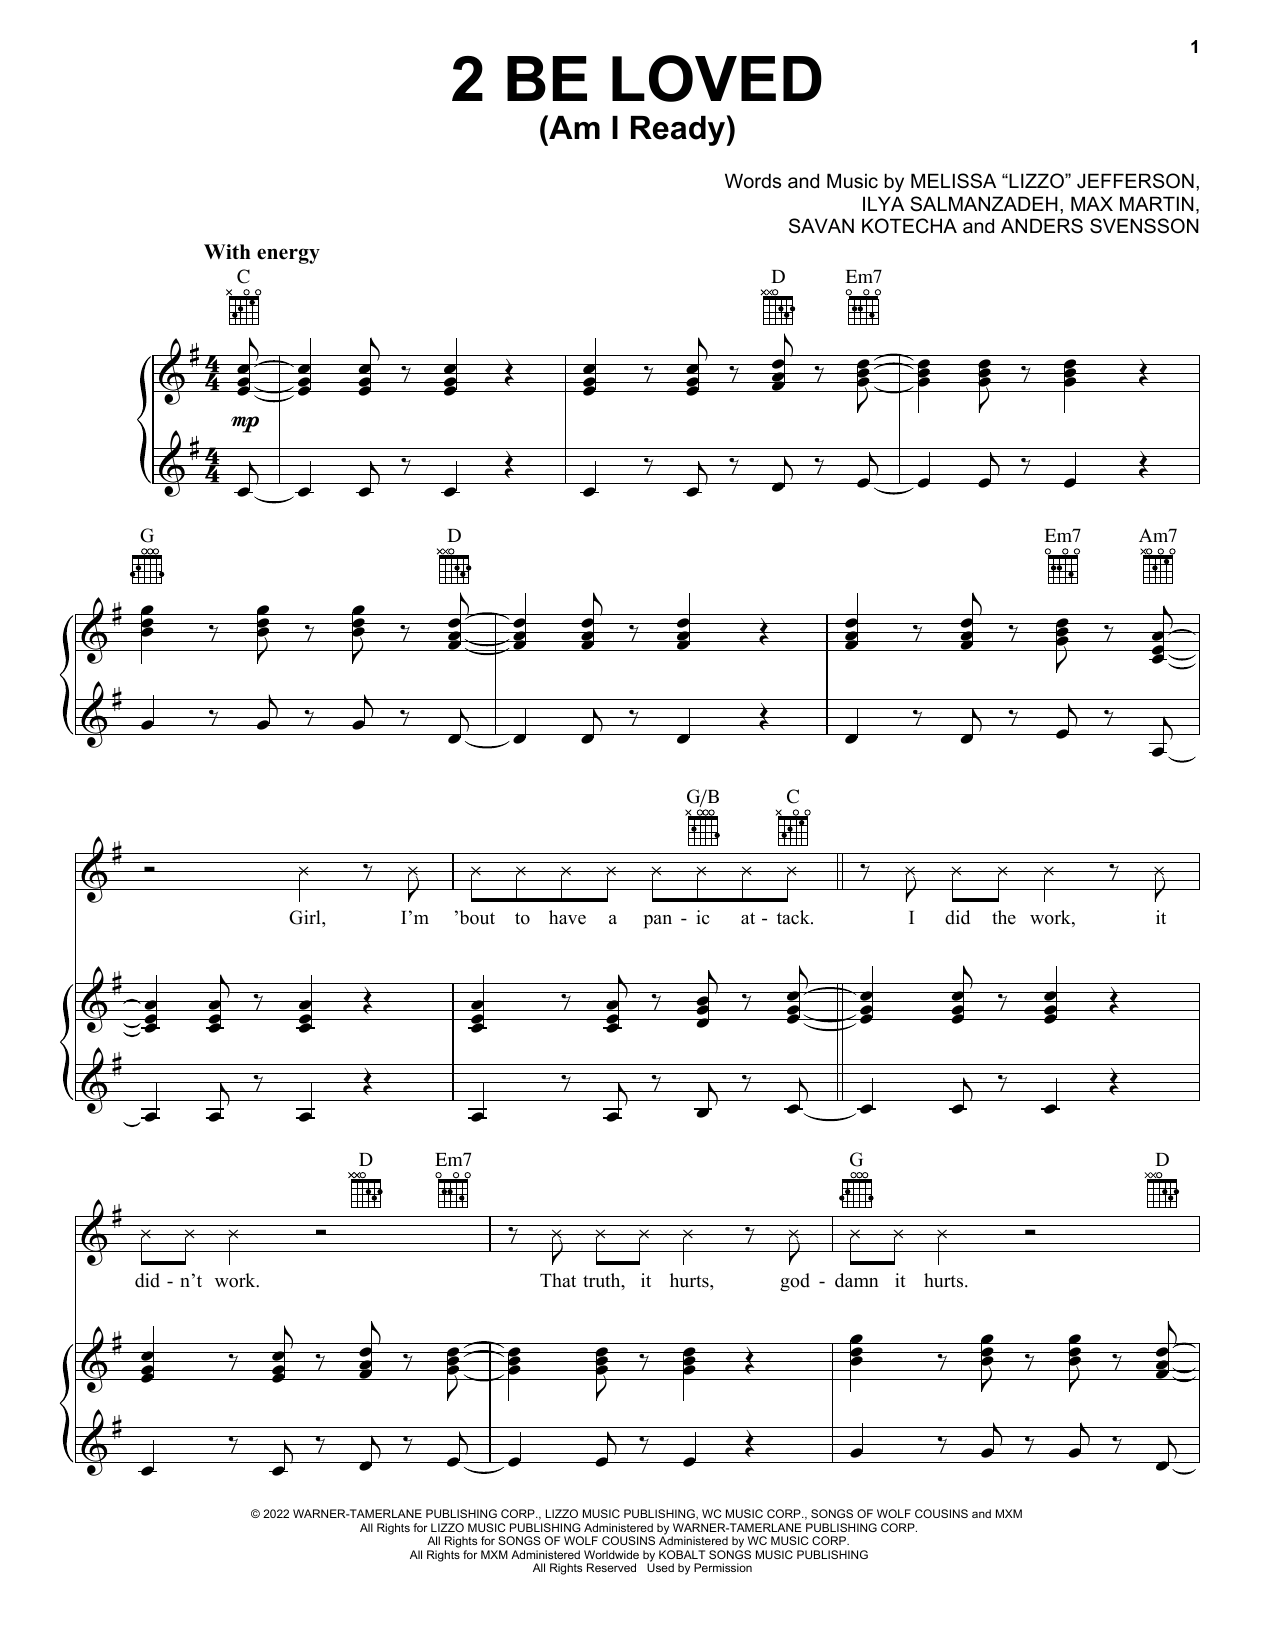 Lizzo 2 Be Loved (Am I Ready) sheet music notes and chords. Download Printable PDF.